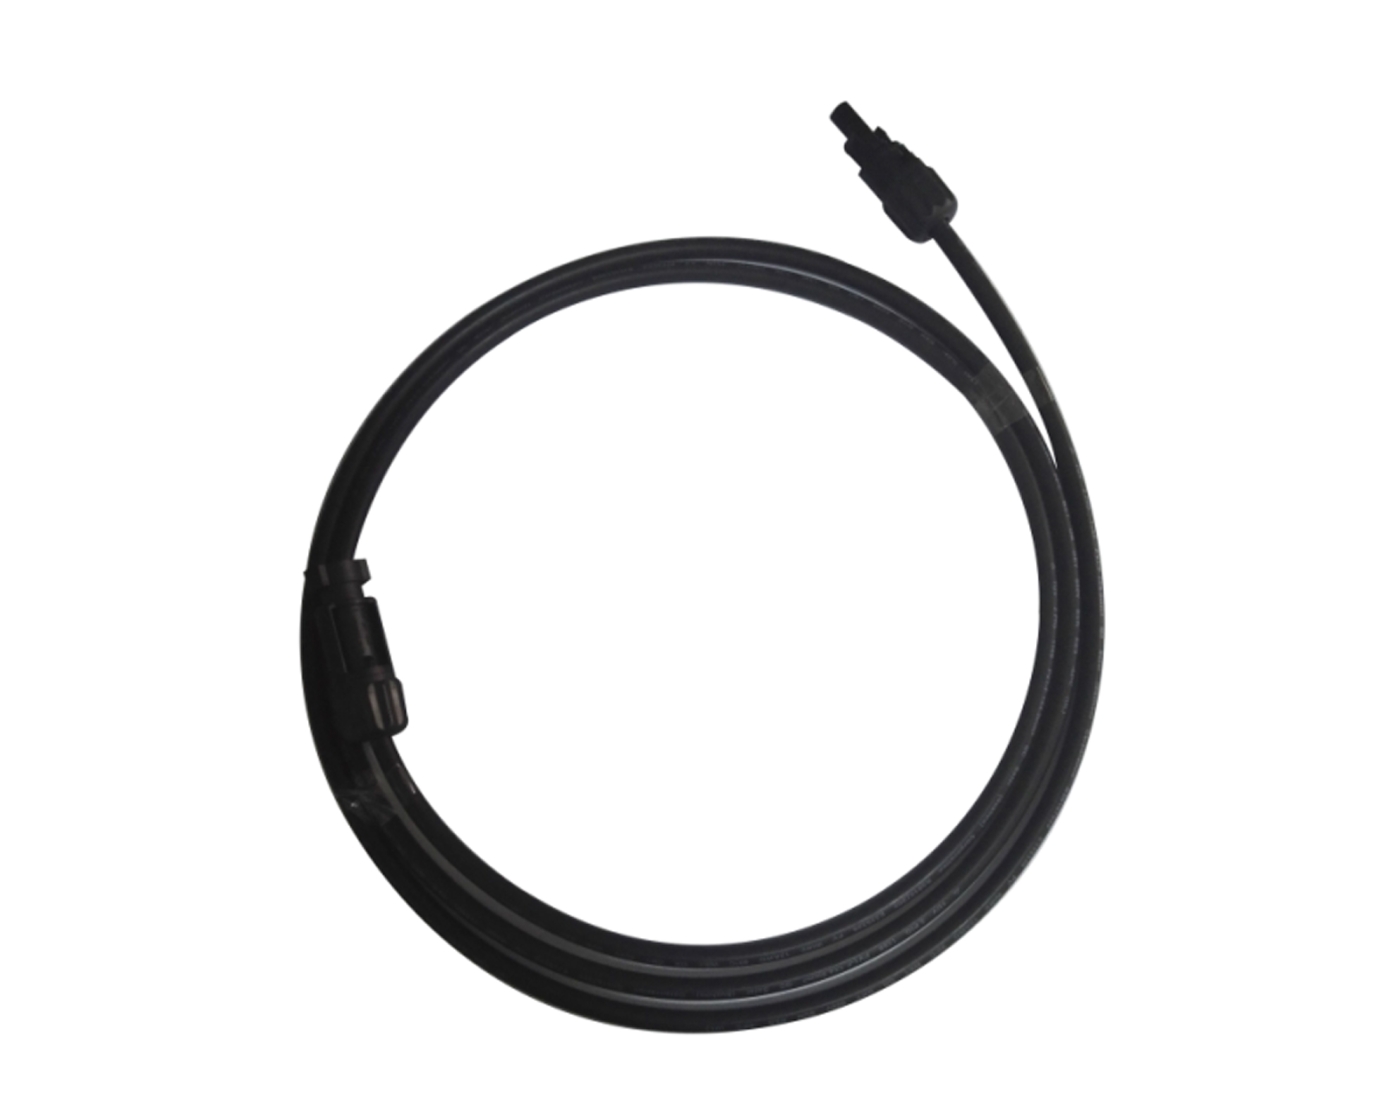 https://emea.apsystems.com/wp-content/uploads/2022/09/APsystems-DC-Extension-Cable-scaled.jpg